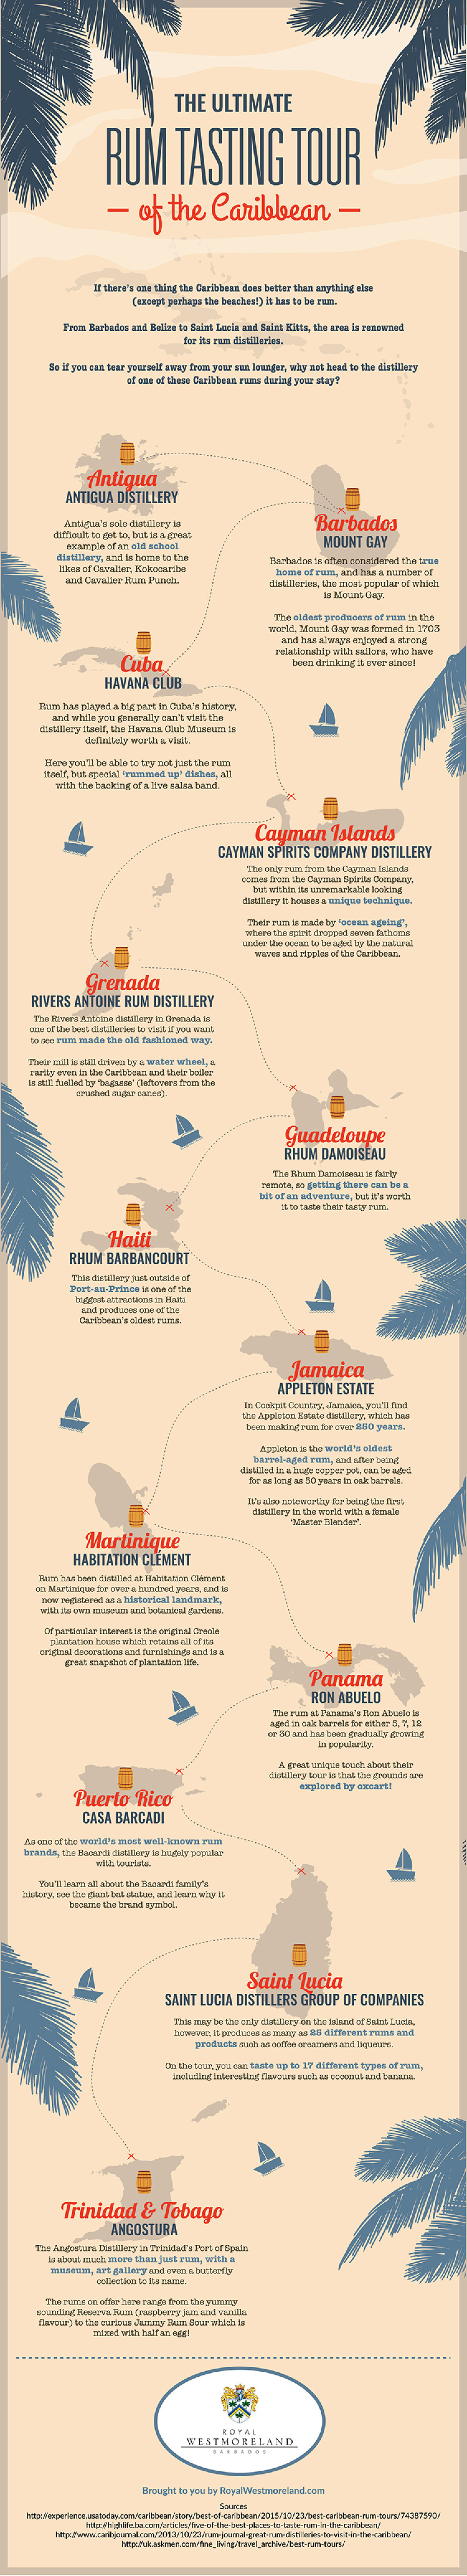 The Ultimate Rum Tasting Tour Of The Caribbean [Infographic] Infographic